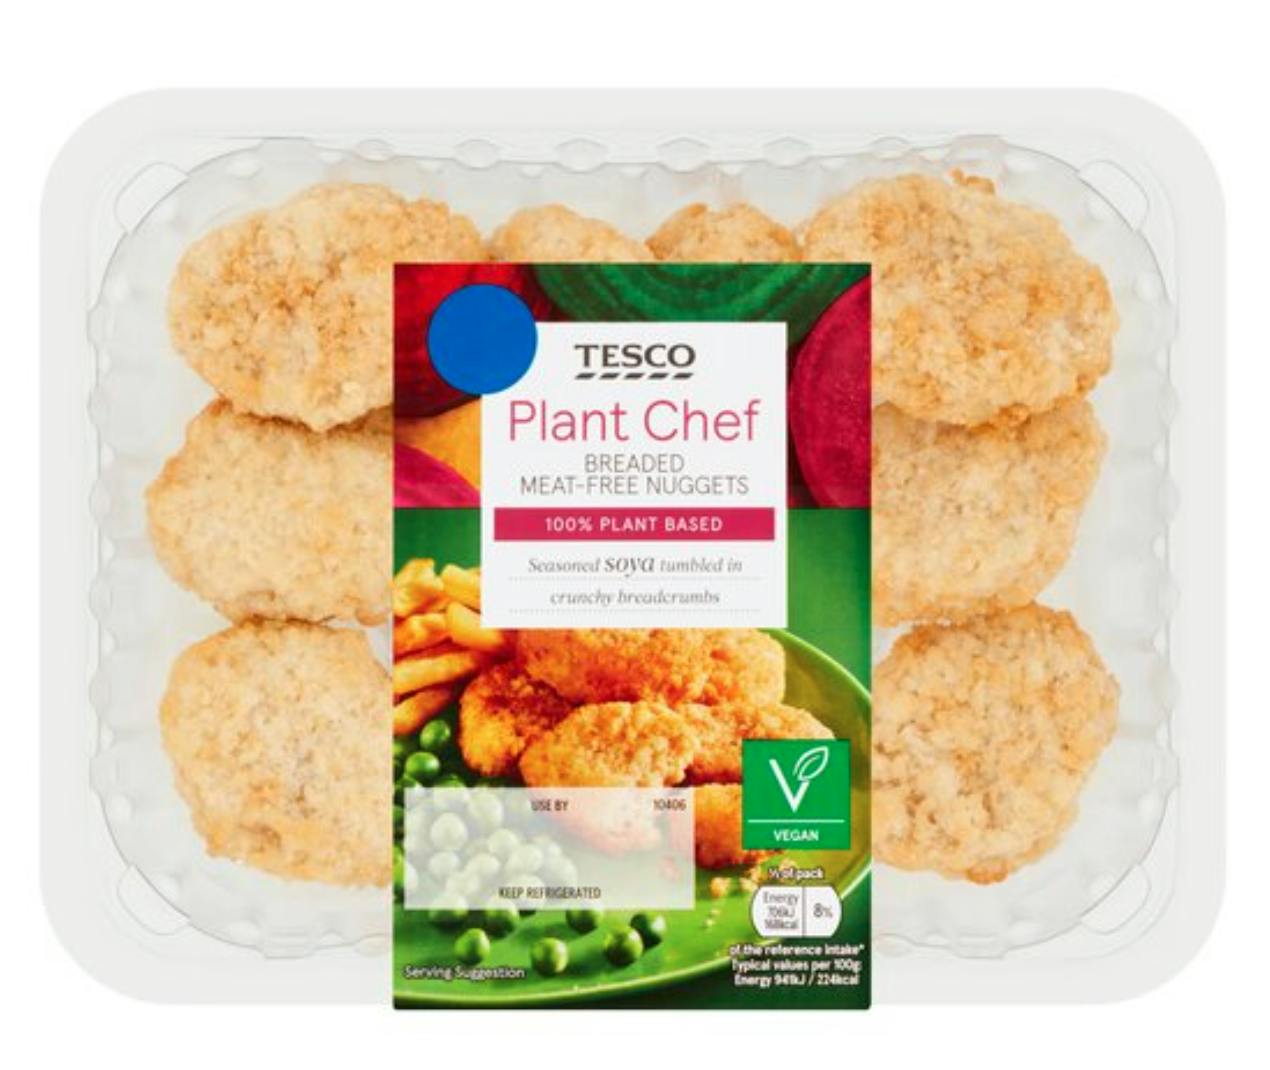 Tesco vegan nuggets in a tray